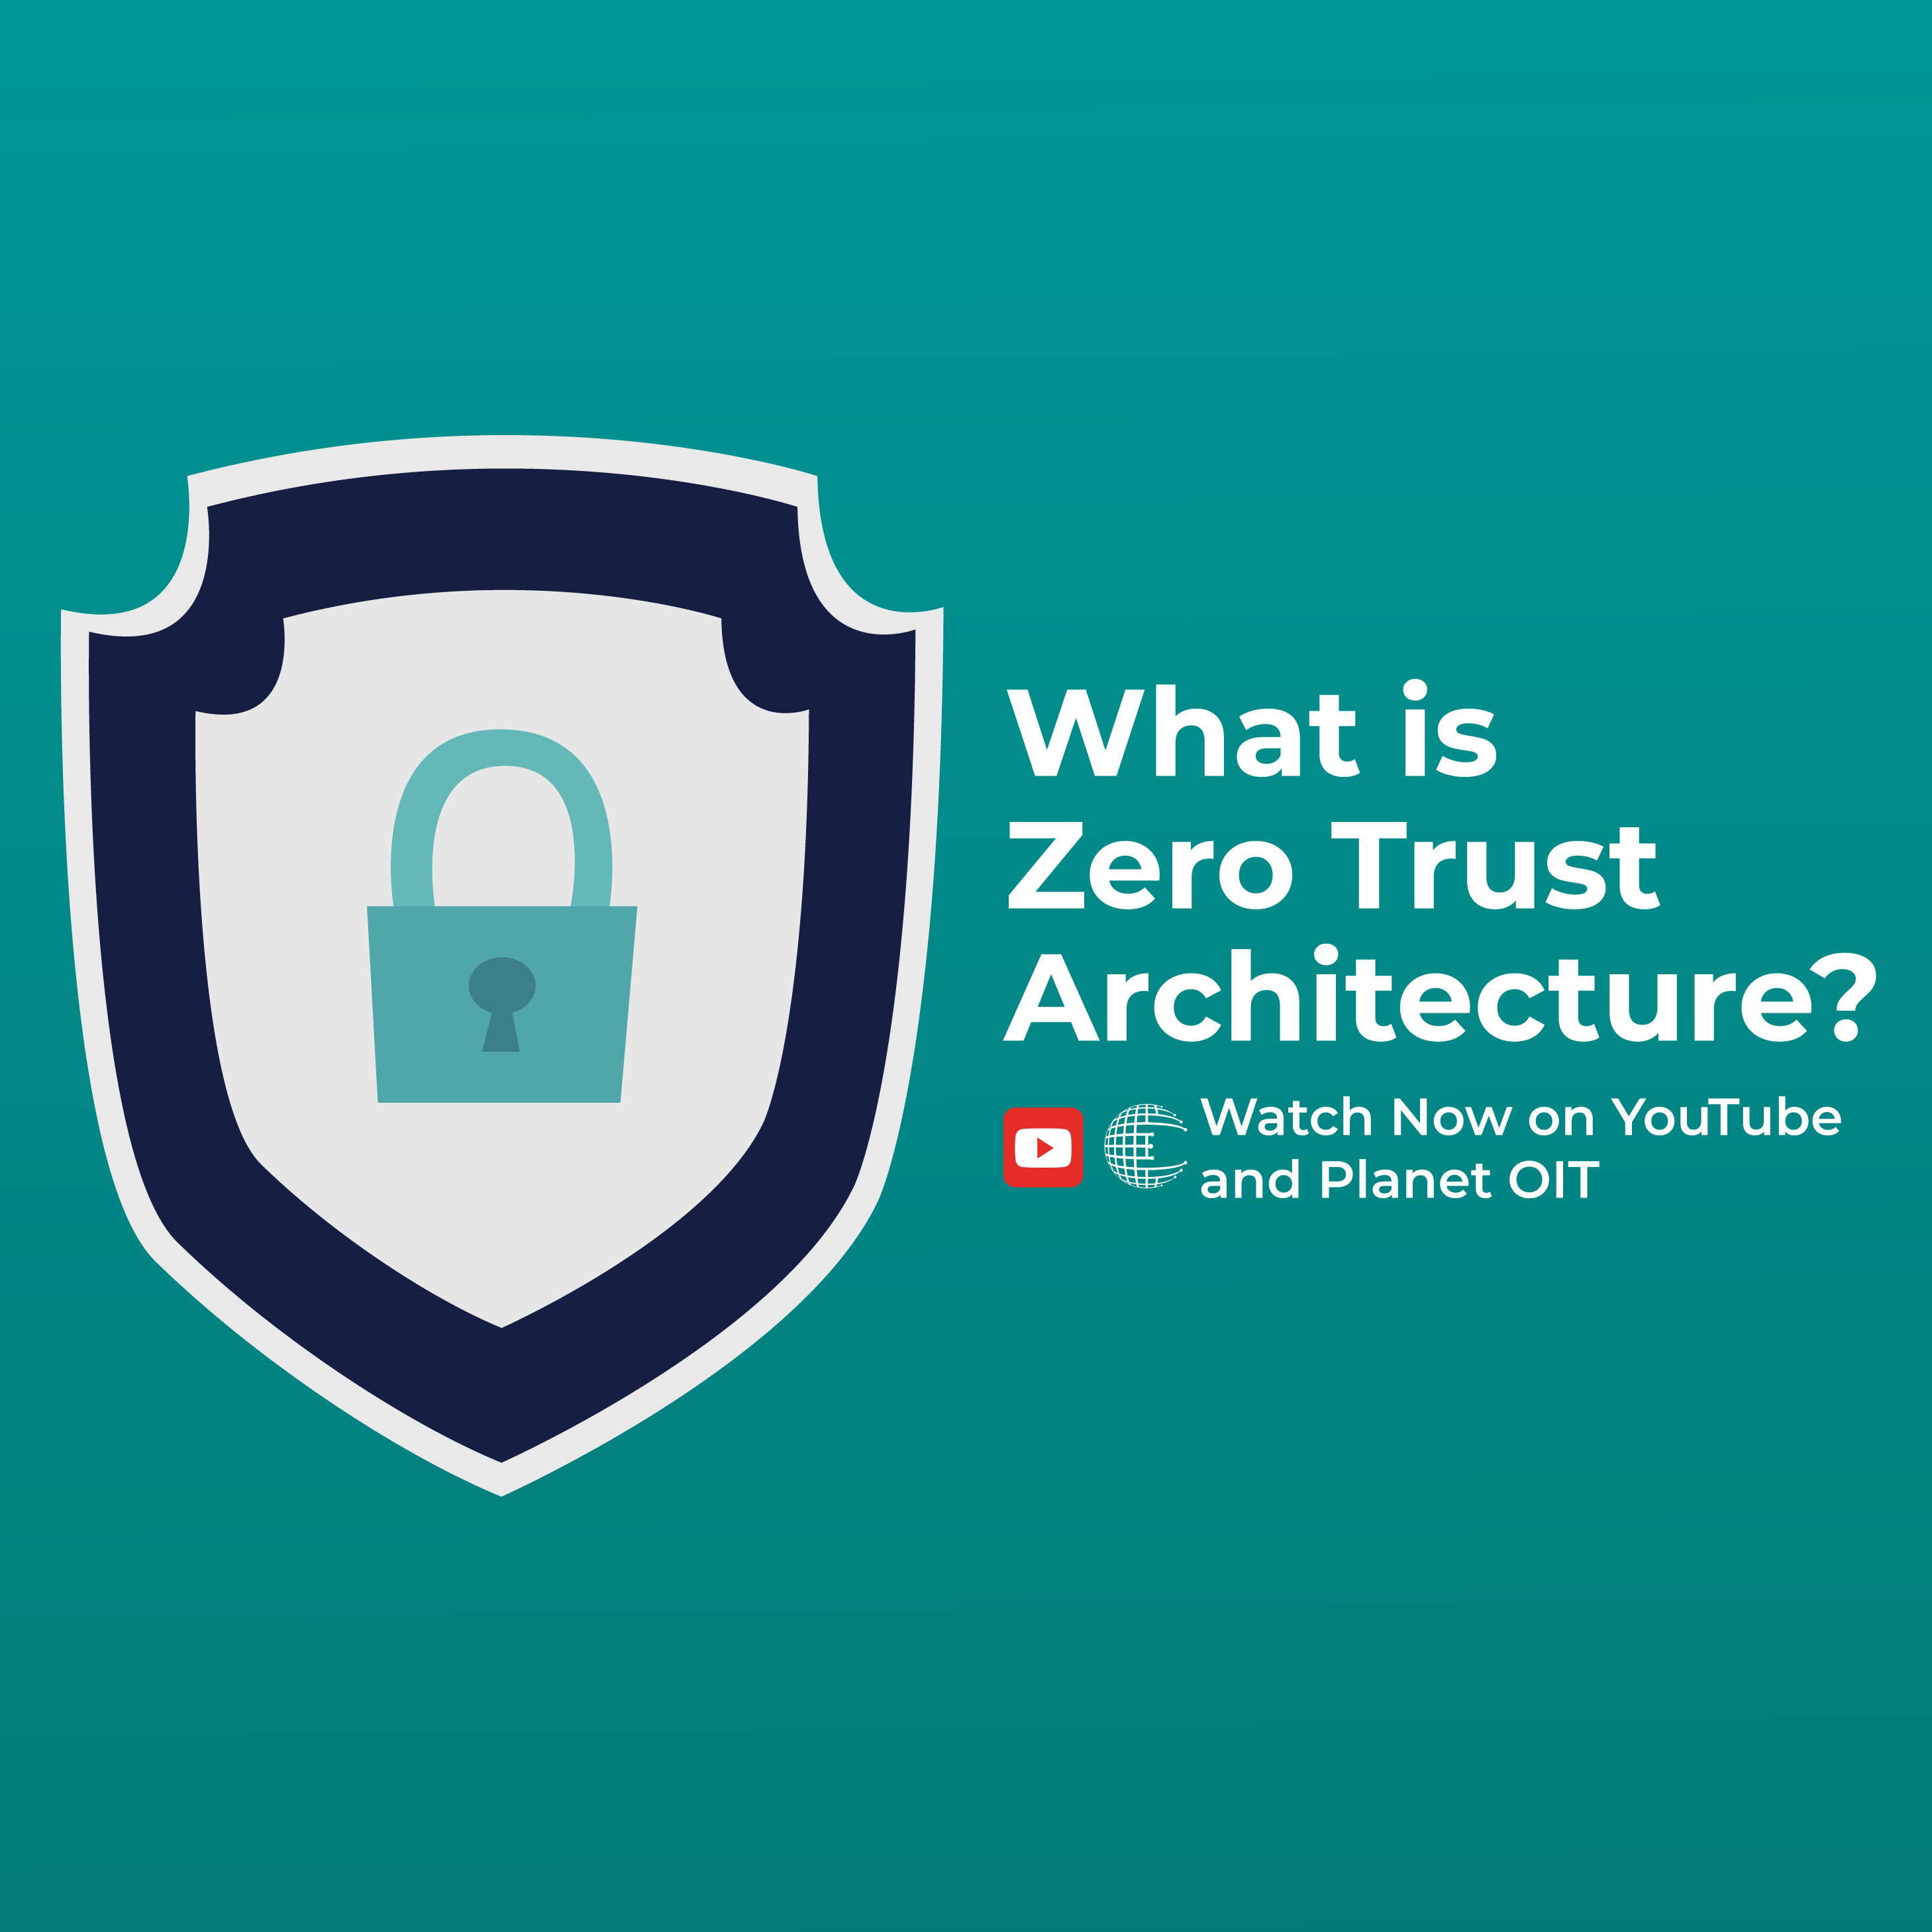 Shield with lock and text "What is Zero Trust Architecture?"